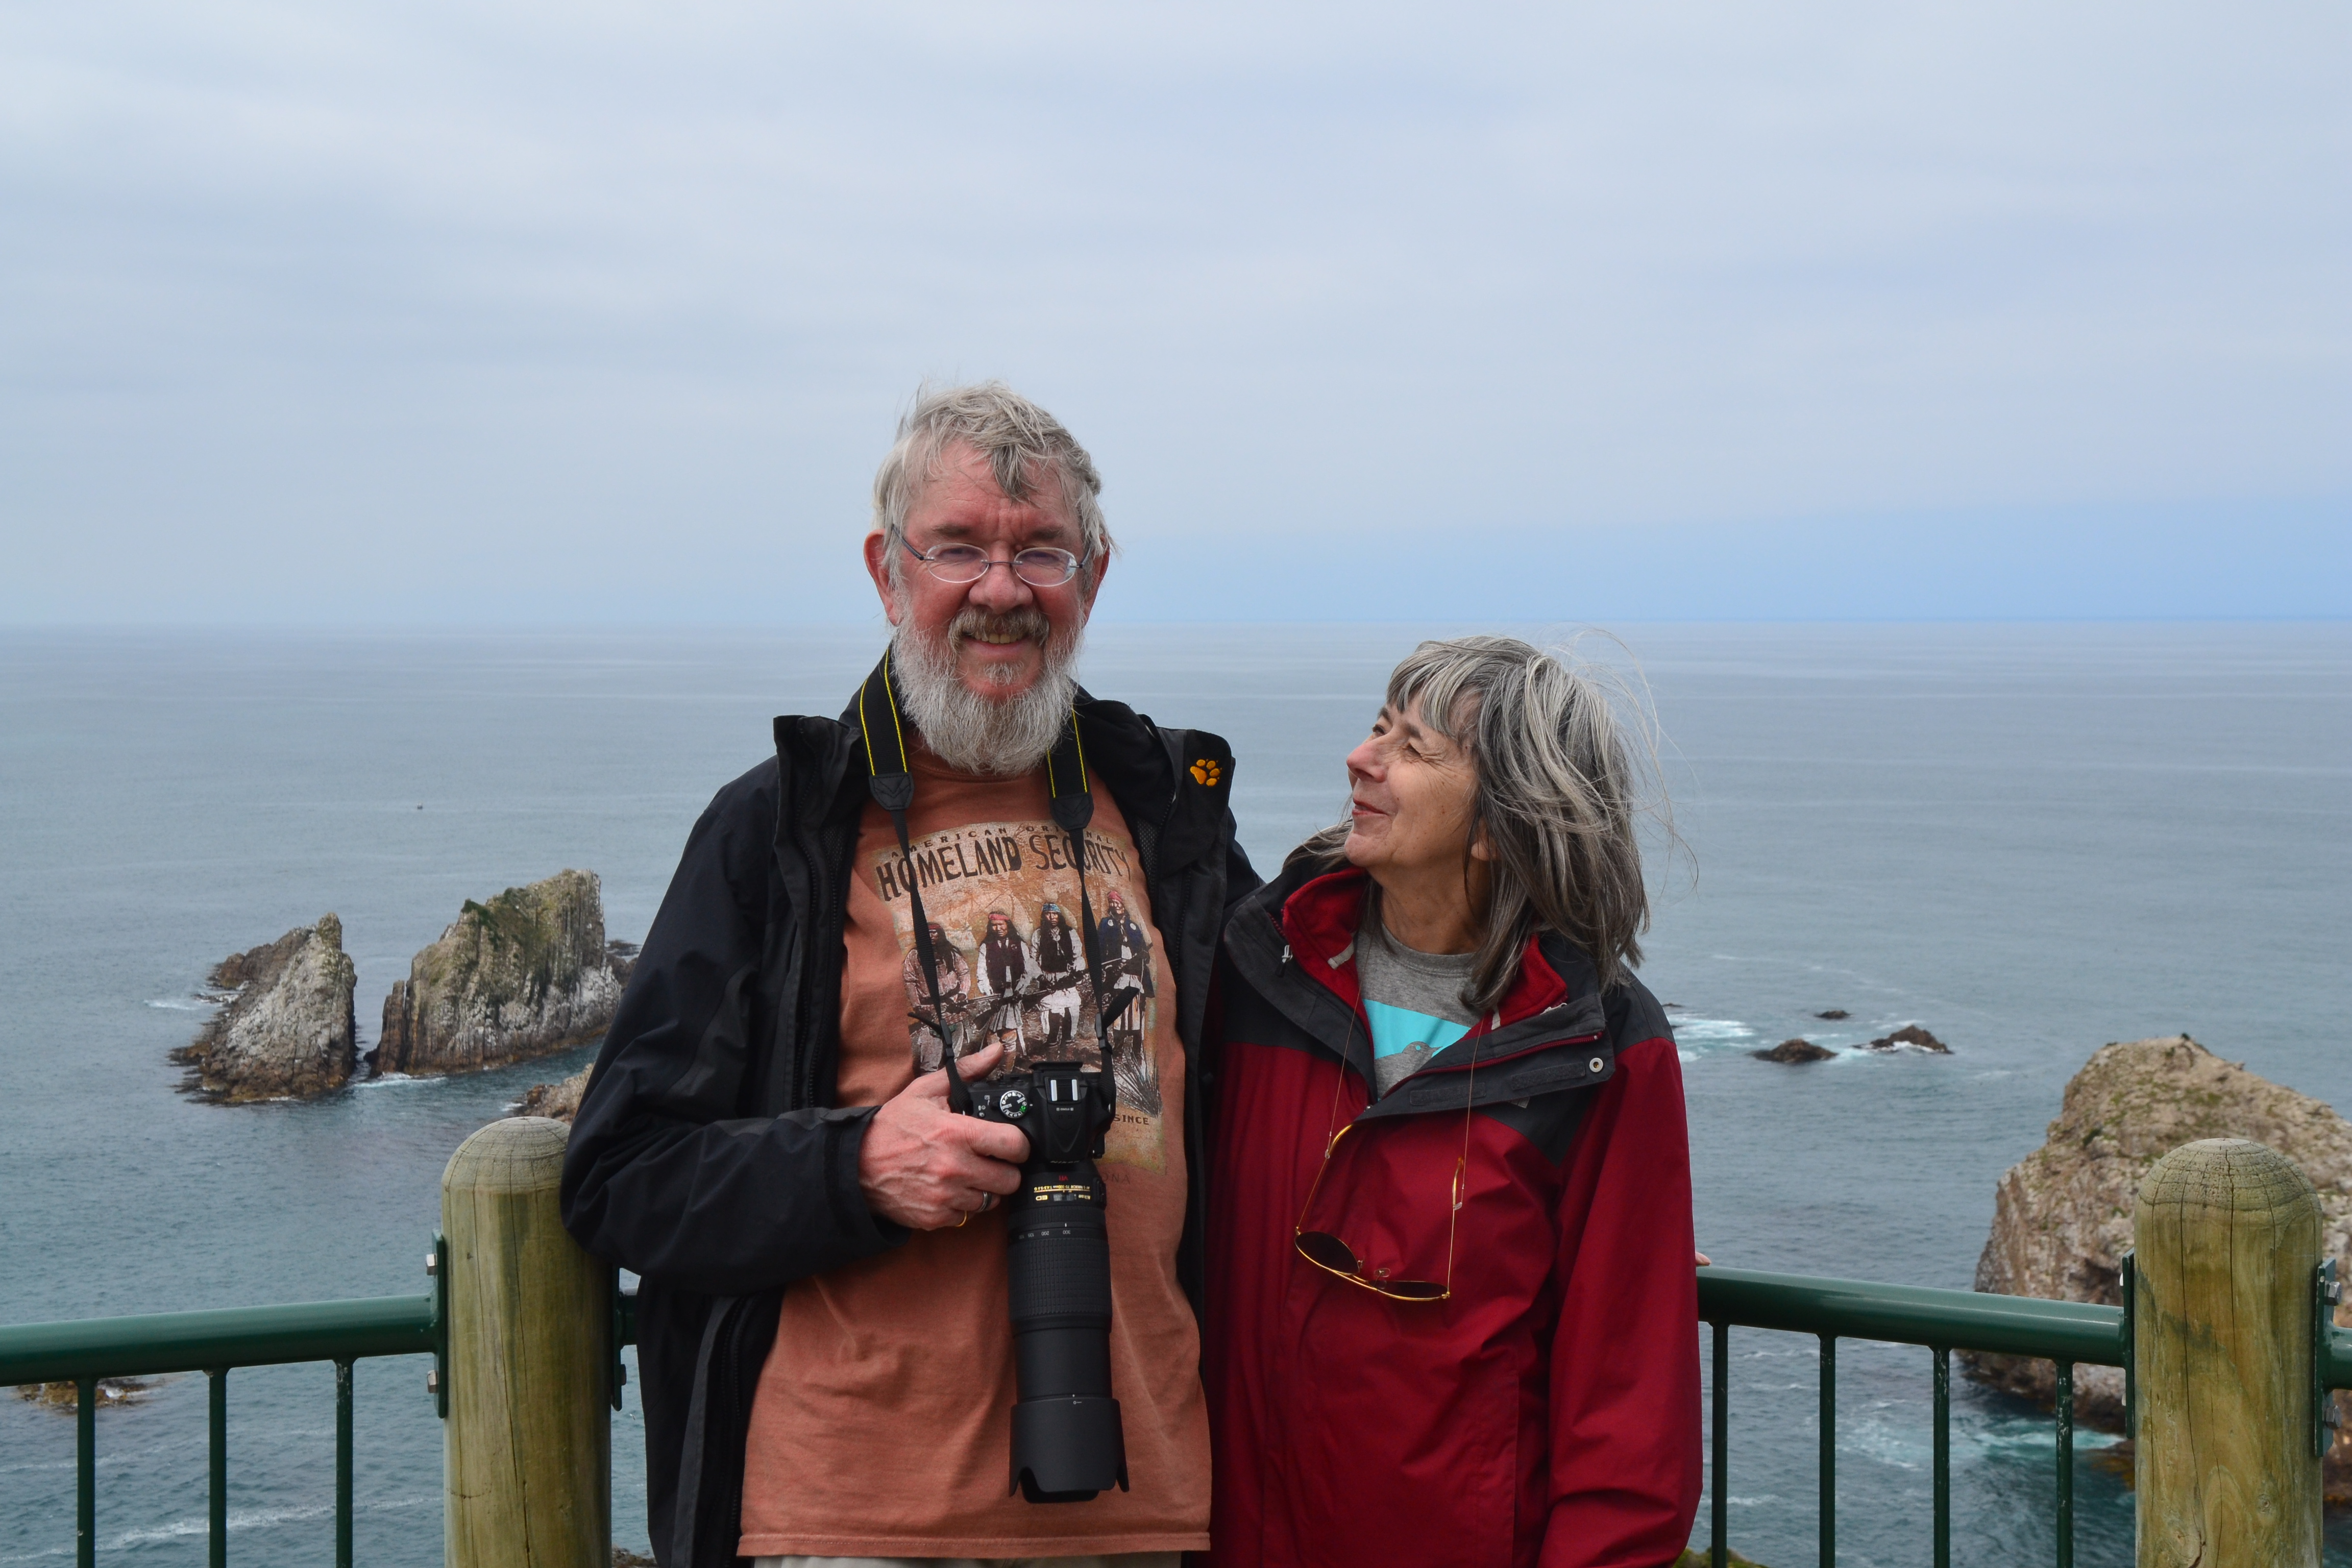 Guy and Touché at Nugget Point